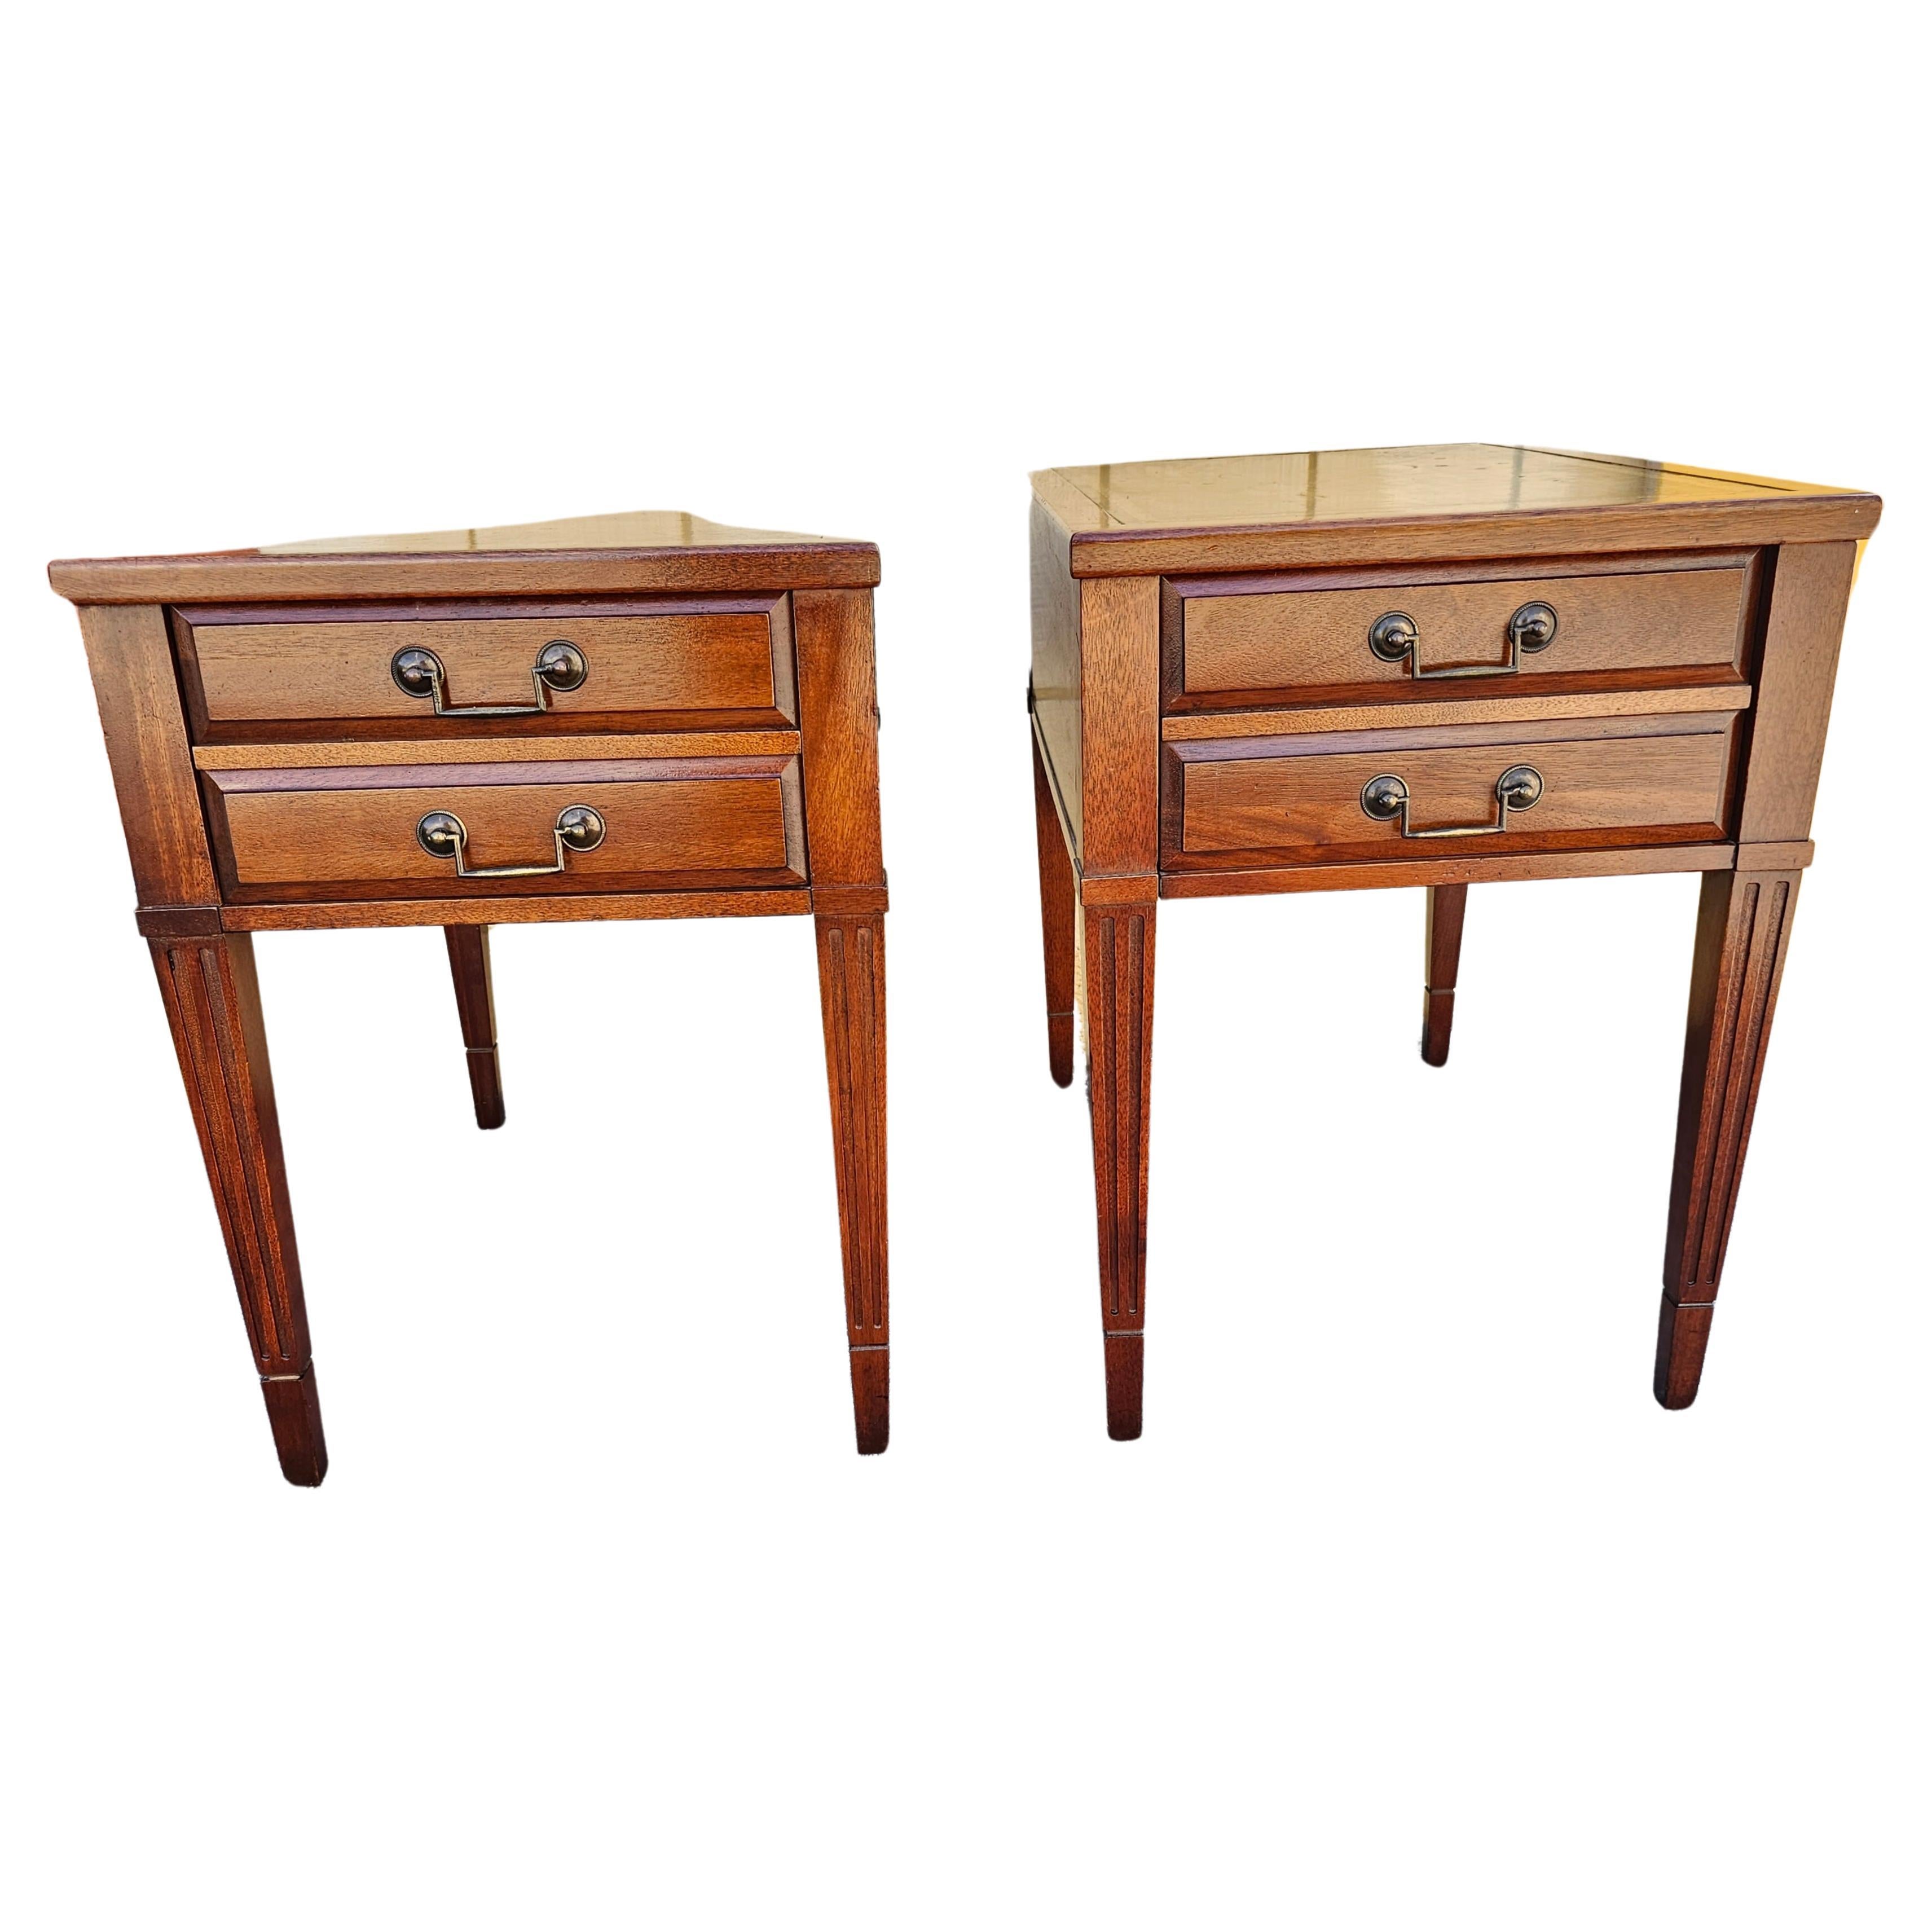 A pair Mid-Century Mersman Mahogany and Stenciled Leather Top Side Tables with large single drawer .
Measures 17